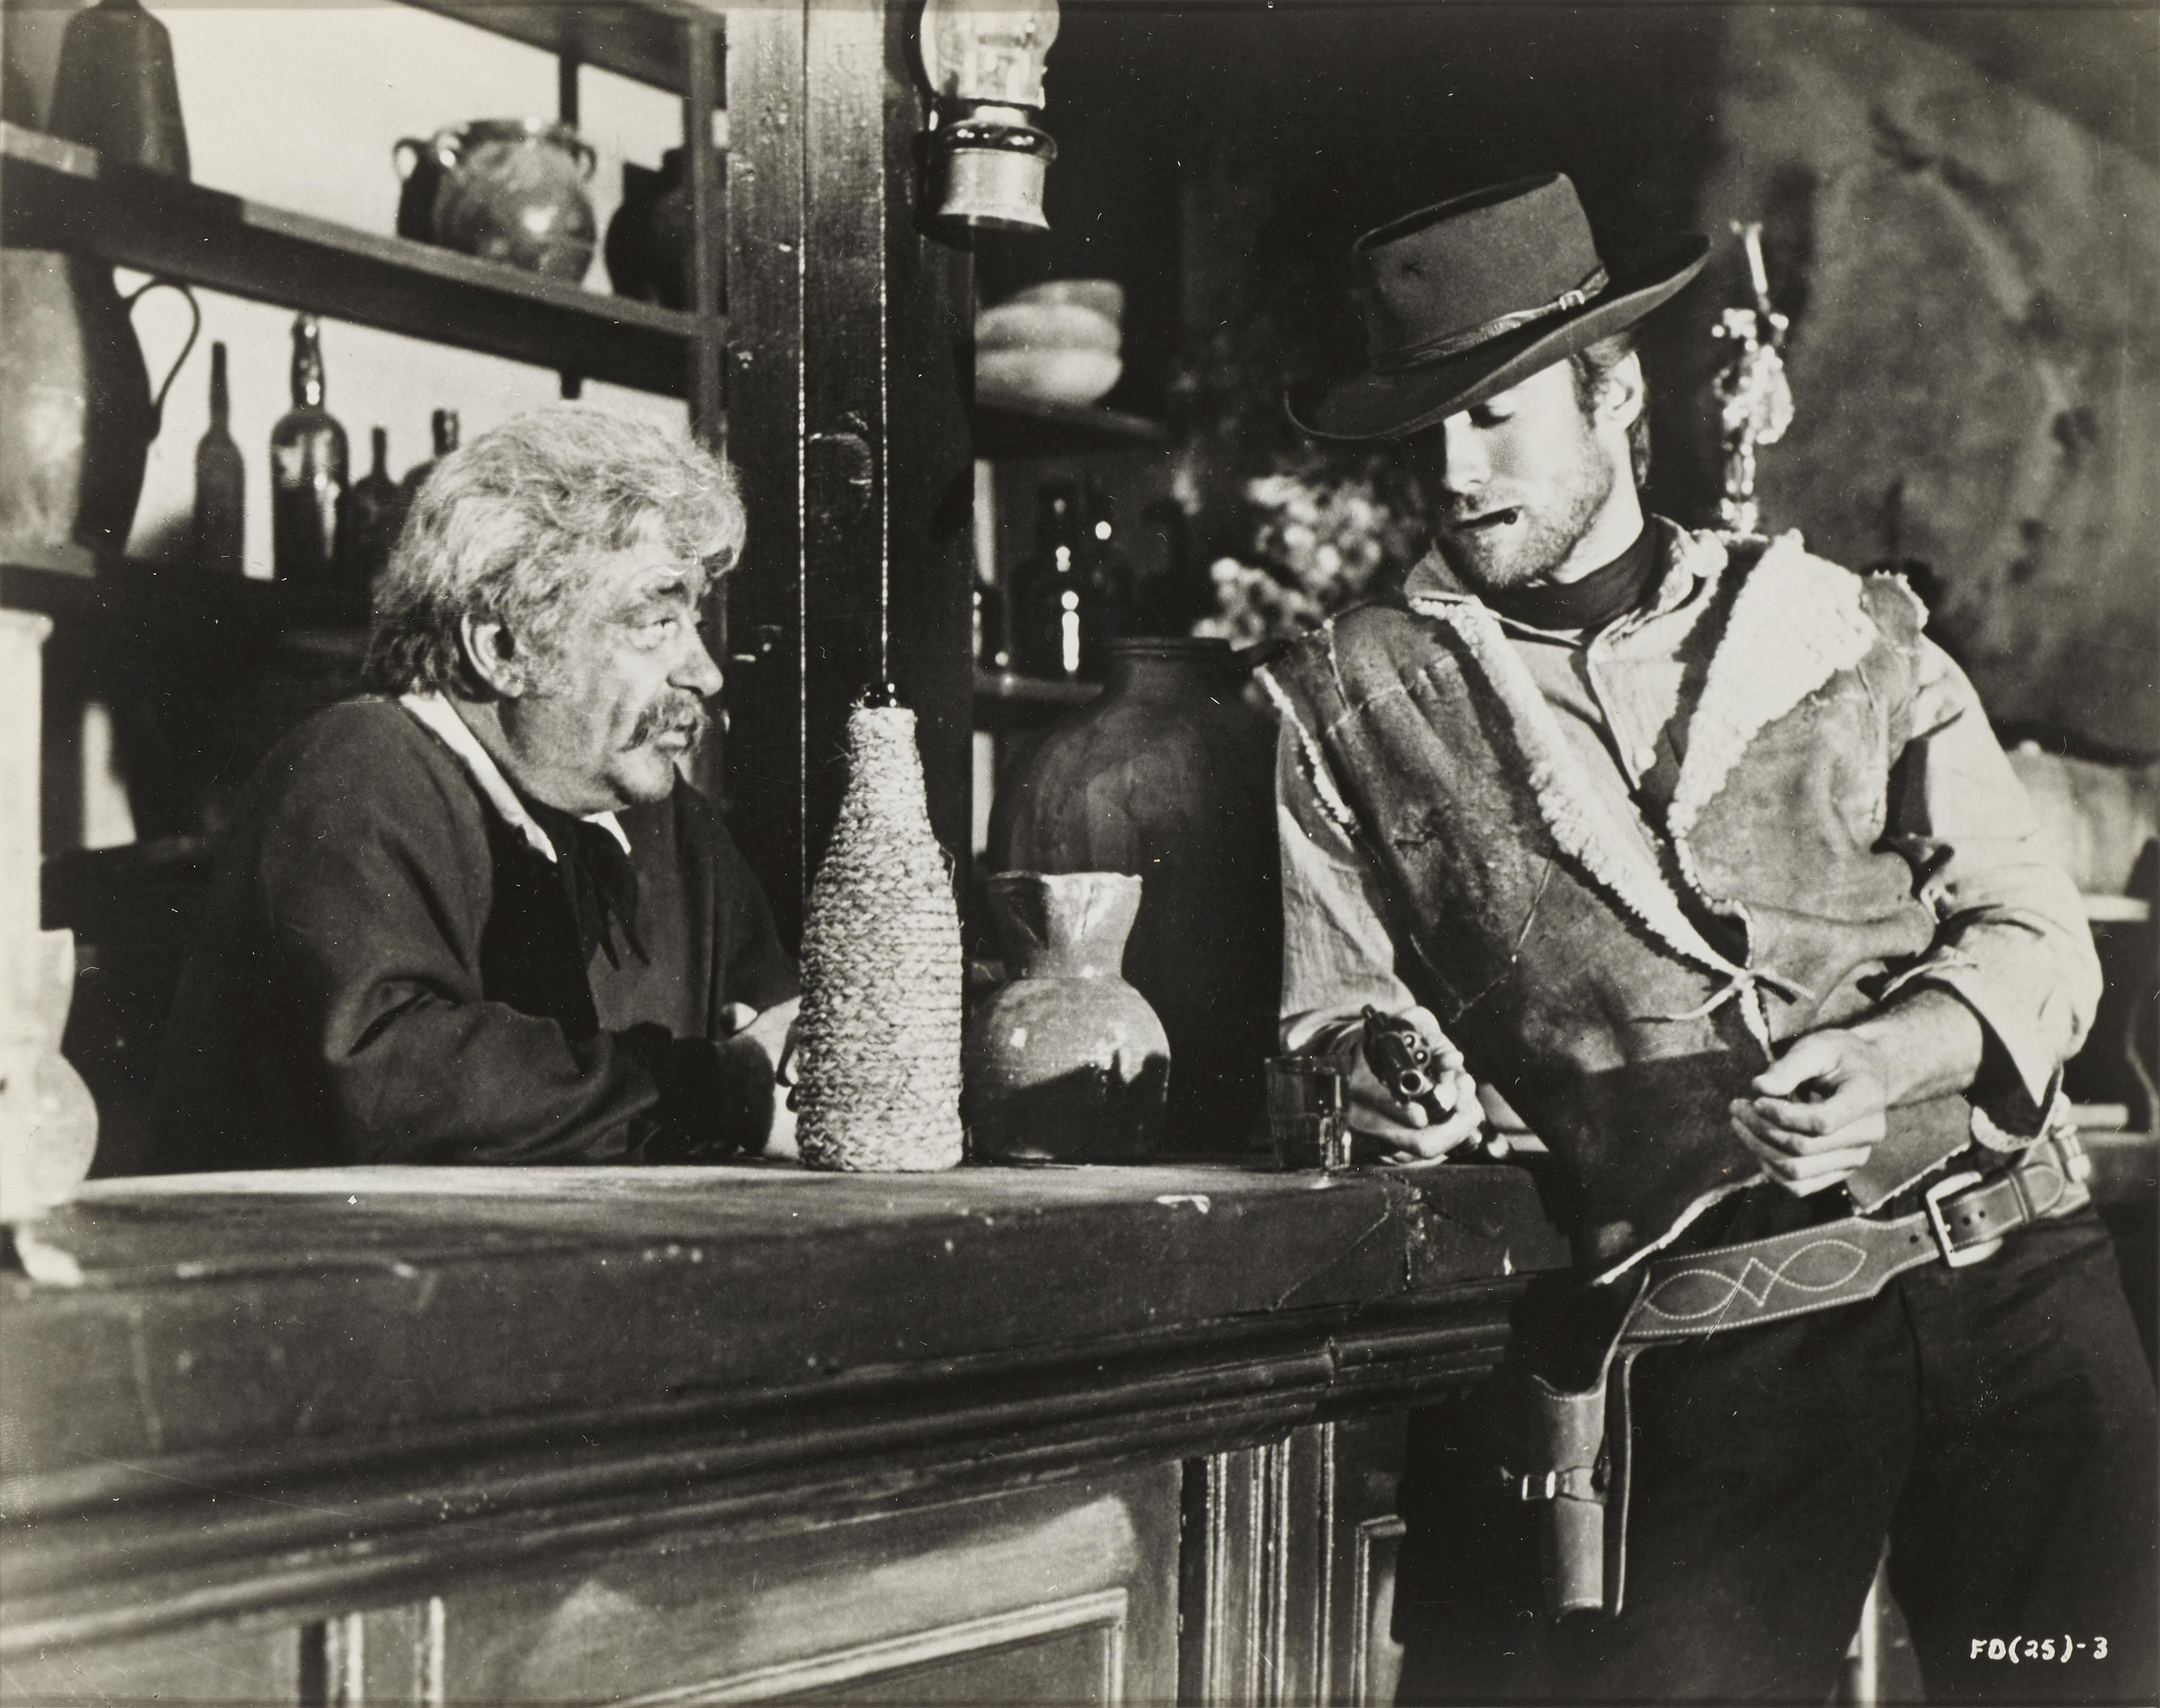 Original US photographic production still from the film A Fistful of Dollars 1964.
This film was directed by Sergio Leone, and starred Clint Eastwood in the first of his Dollars trilogy. This piece is framed in a Sapele wood
frame with acid free